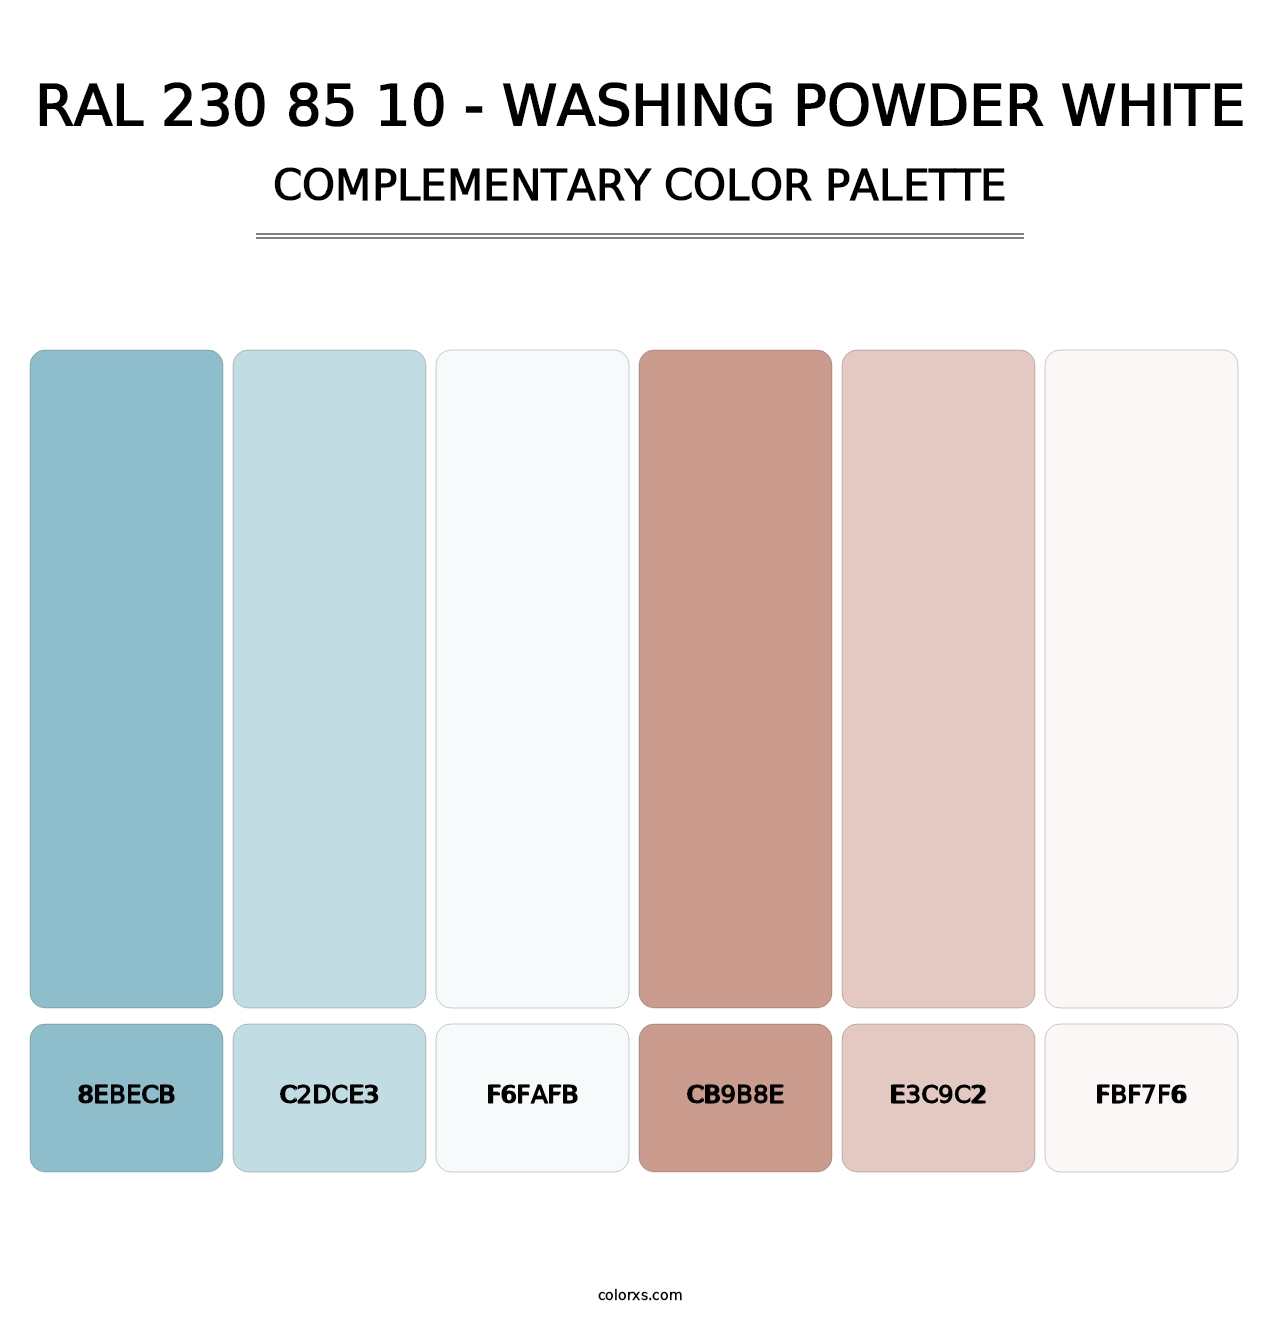 RAL 230 85 10 - Washing Powder White - Complementary Color Palette